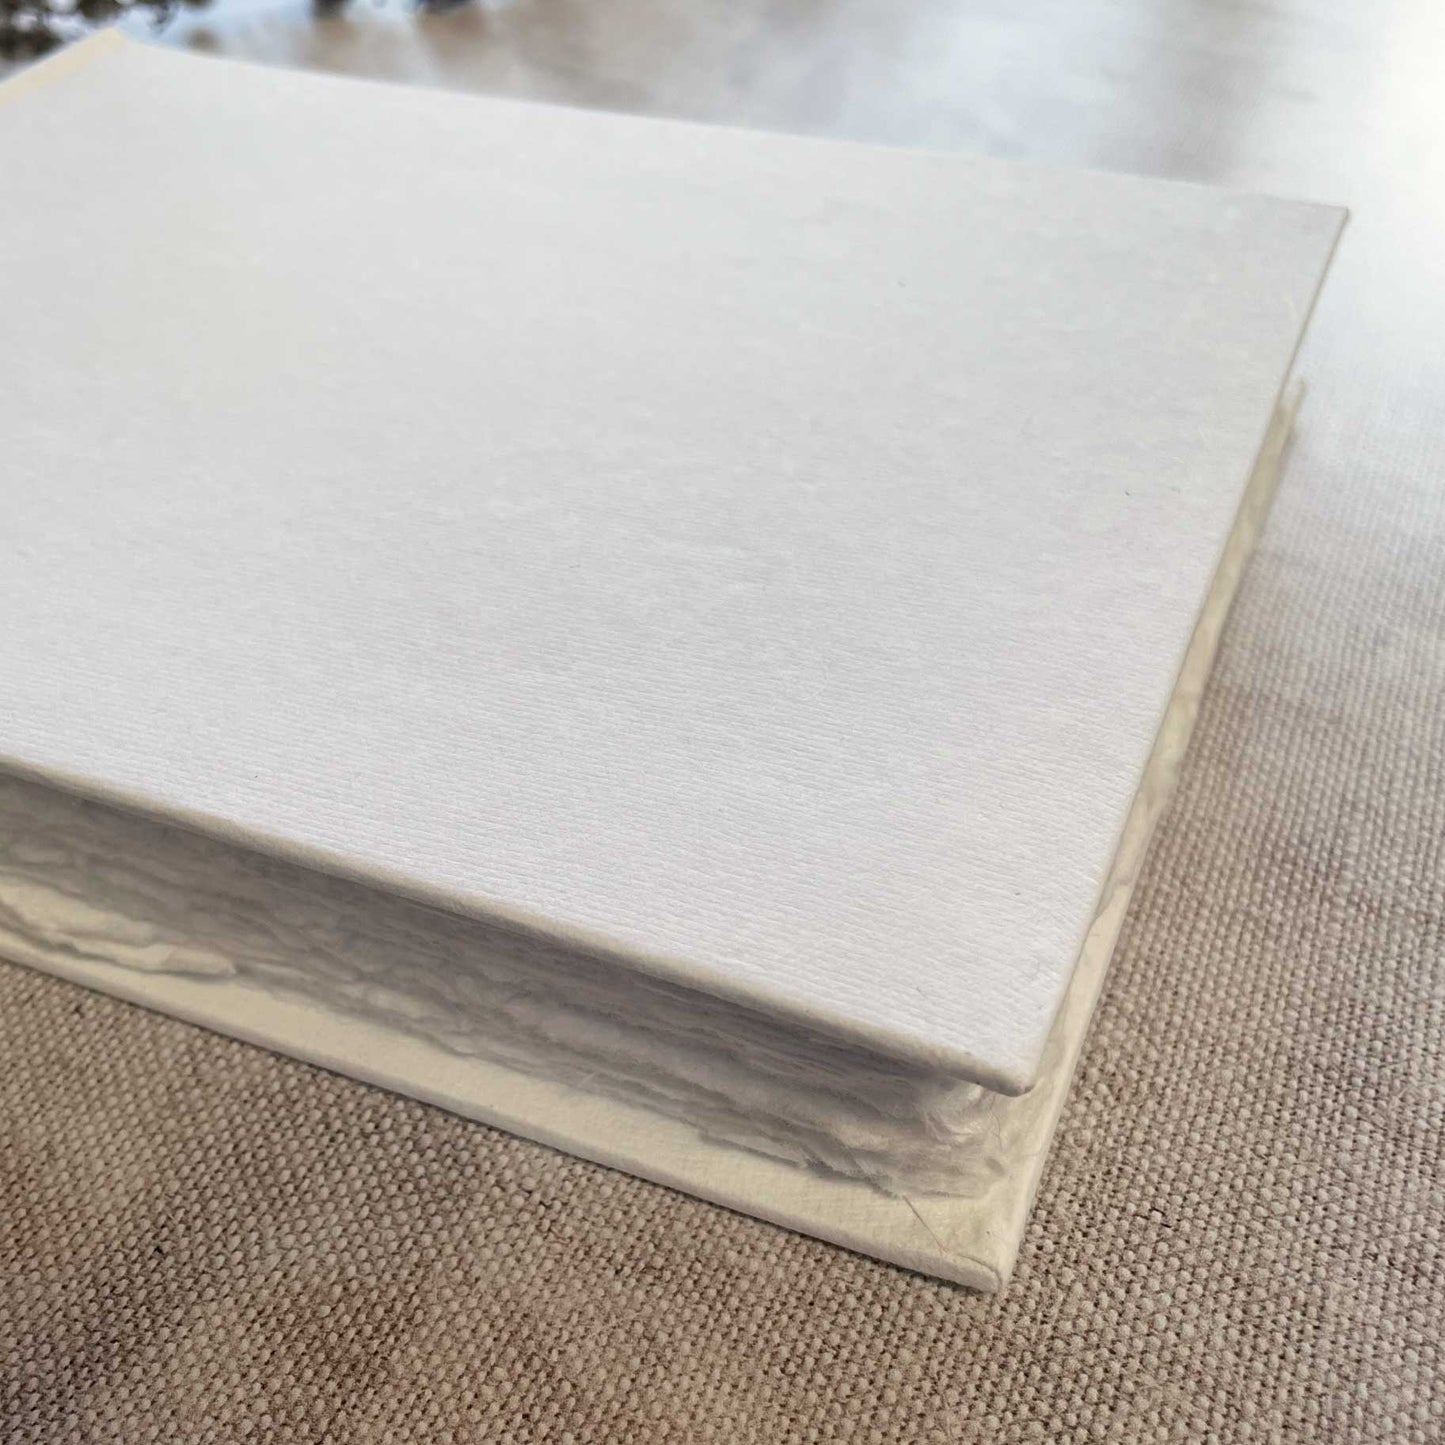 White blank guest book with handmade paper pages.  Blank journal to decorate yourself.  Made from recycled handmade paper